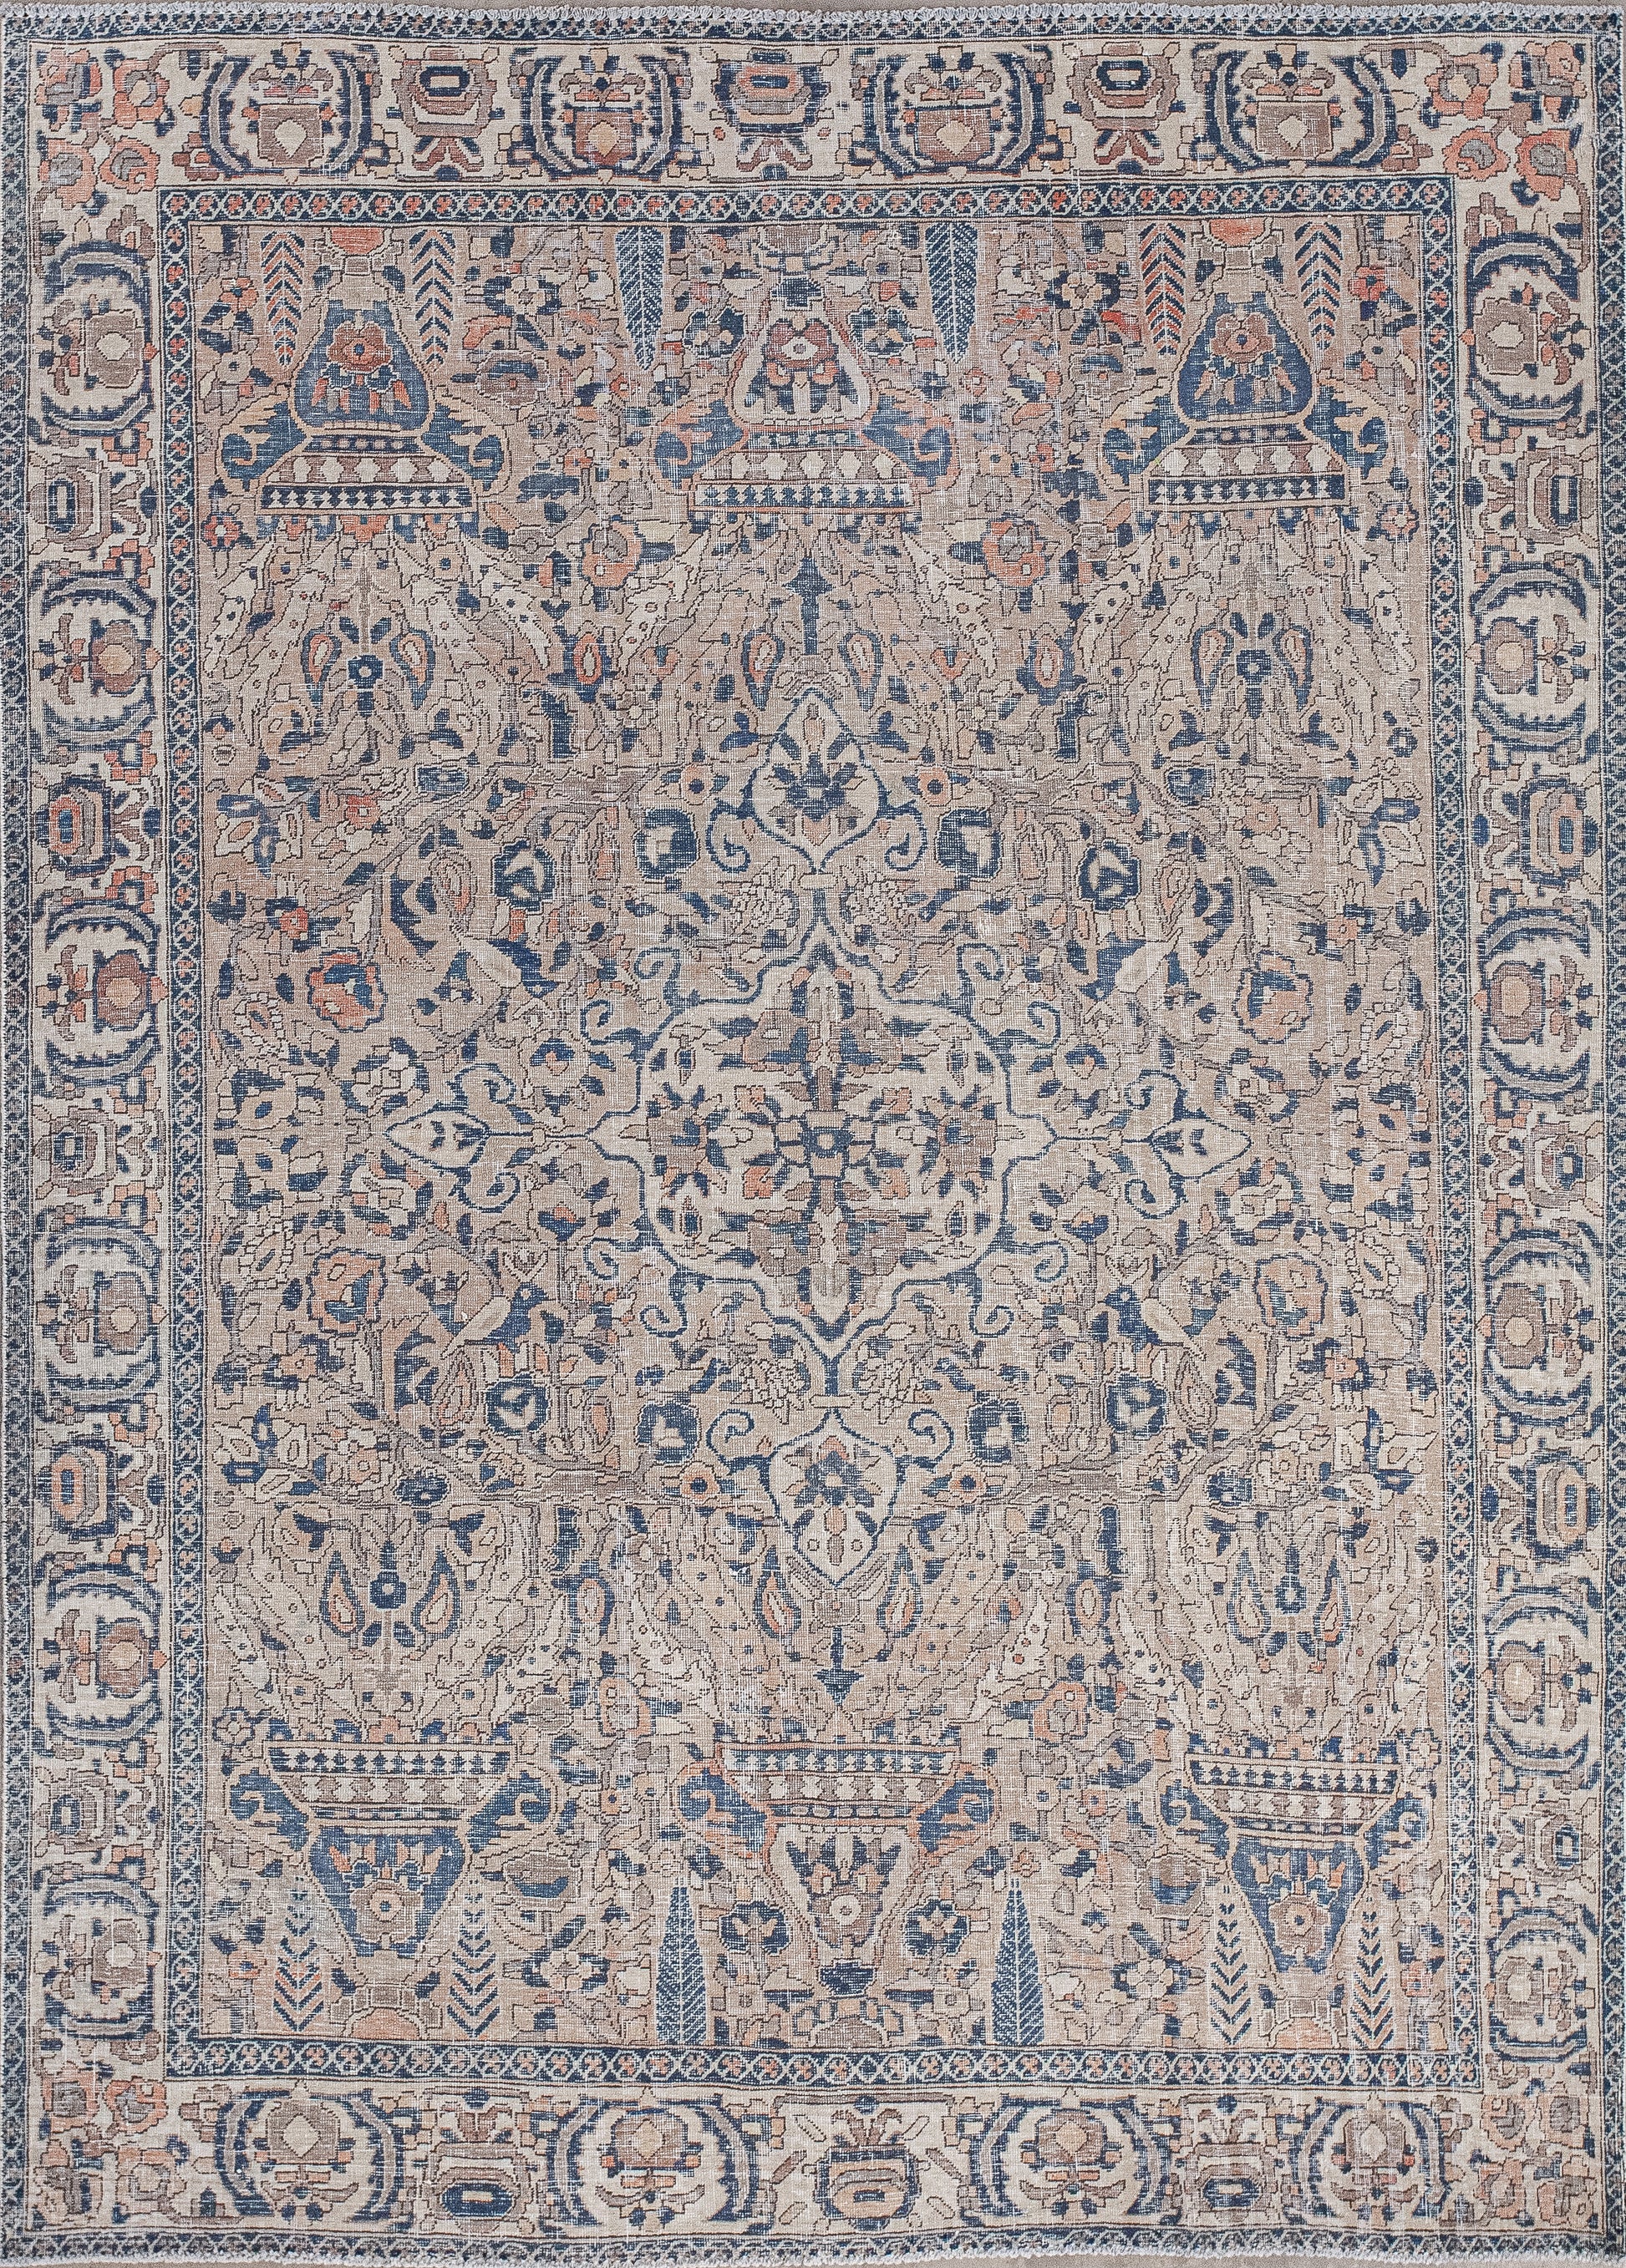 This stunning rug comes with a creative representation of flower pots. The friendly color scheme has variations of brown, blue to create contrast, and orange accents.